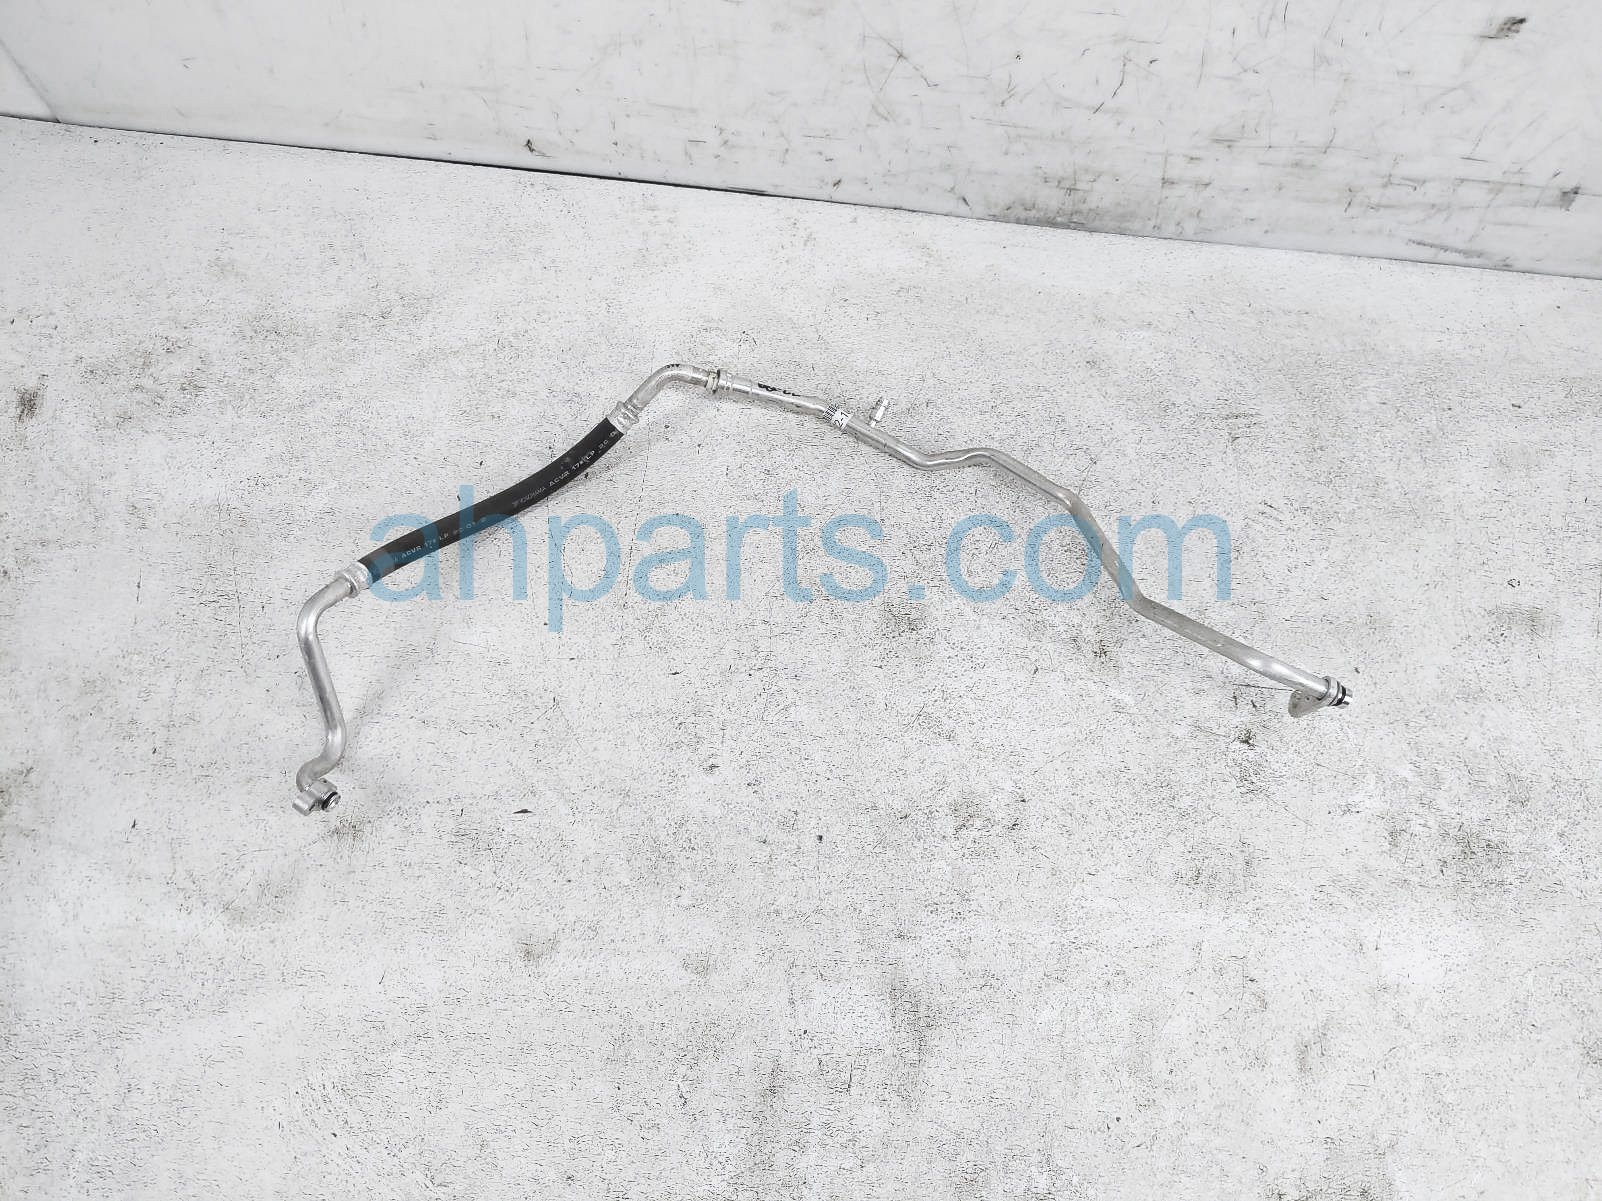 $100 Toyota A/C SUCTION PIPE & HOSE - 1.8L SDN